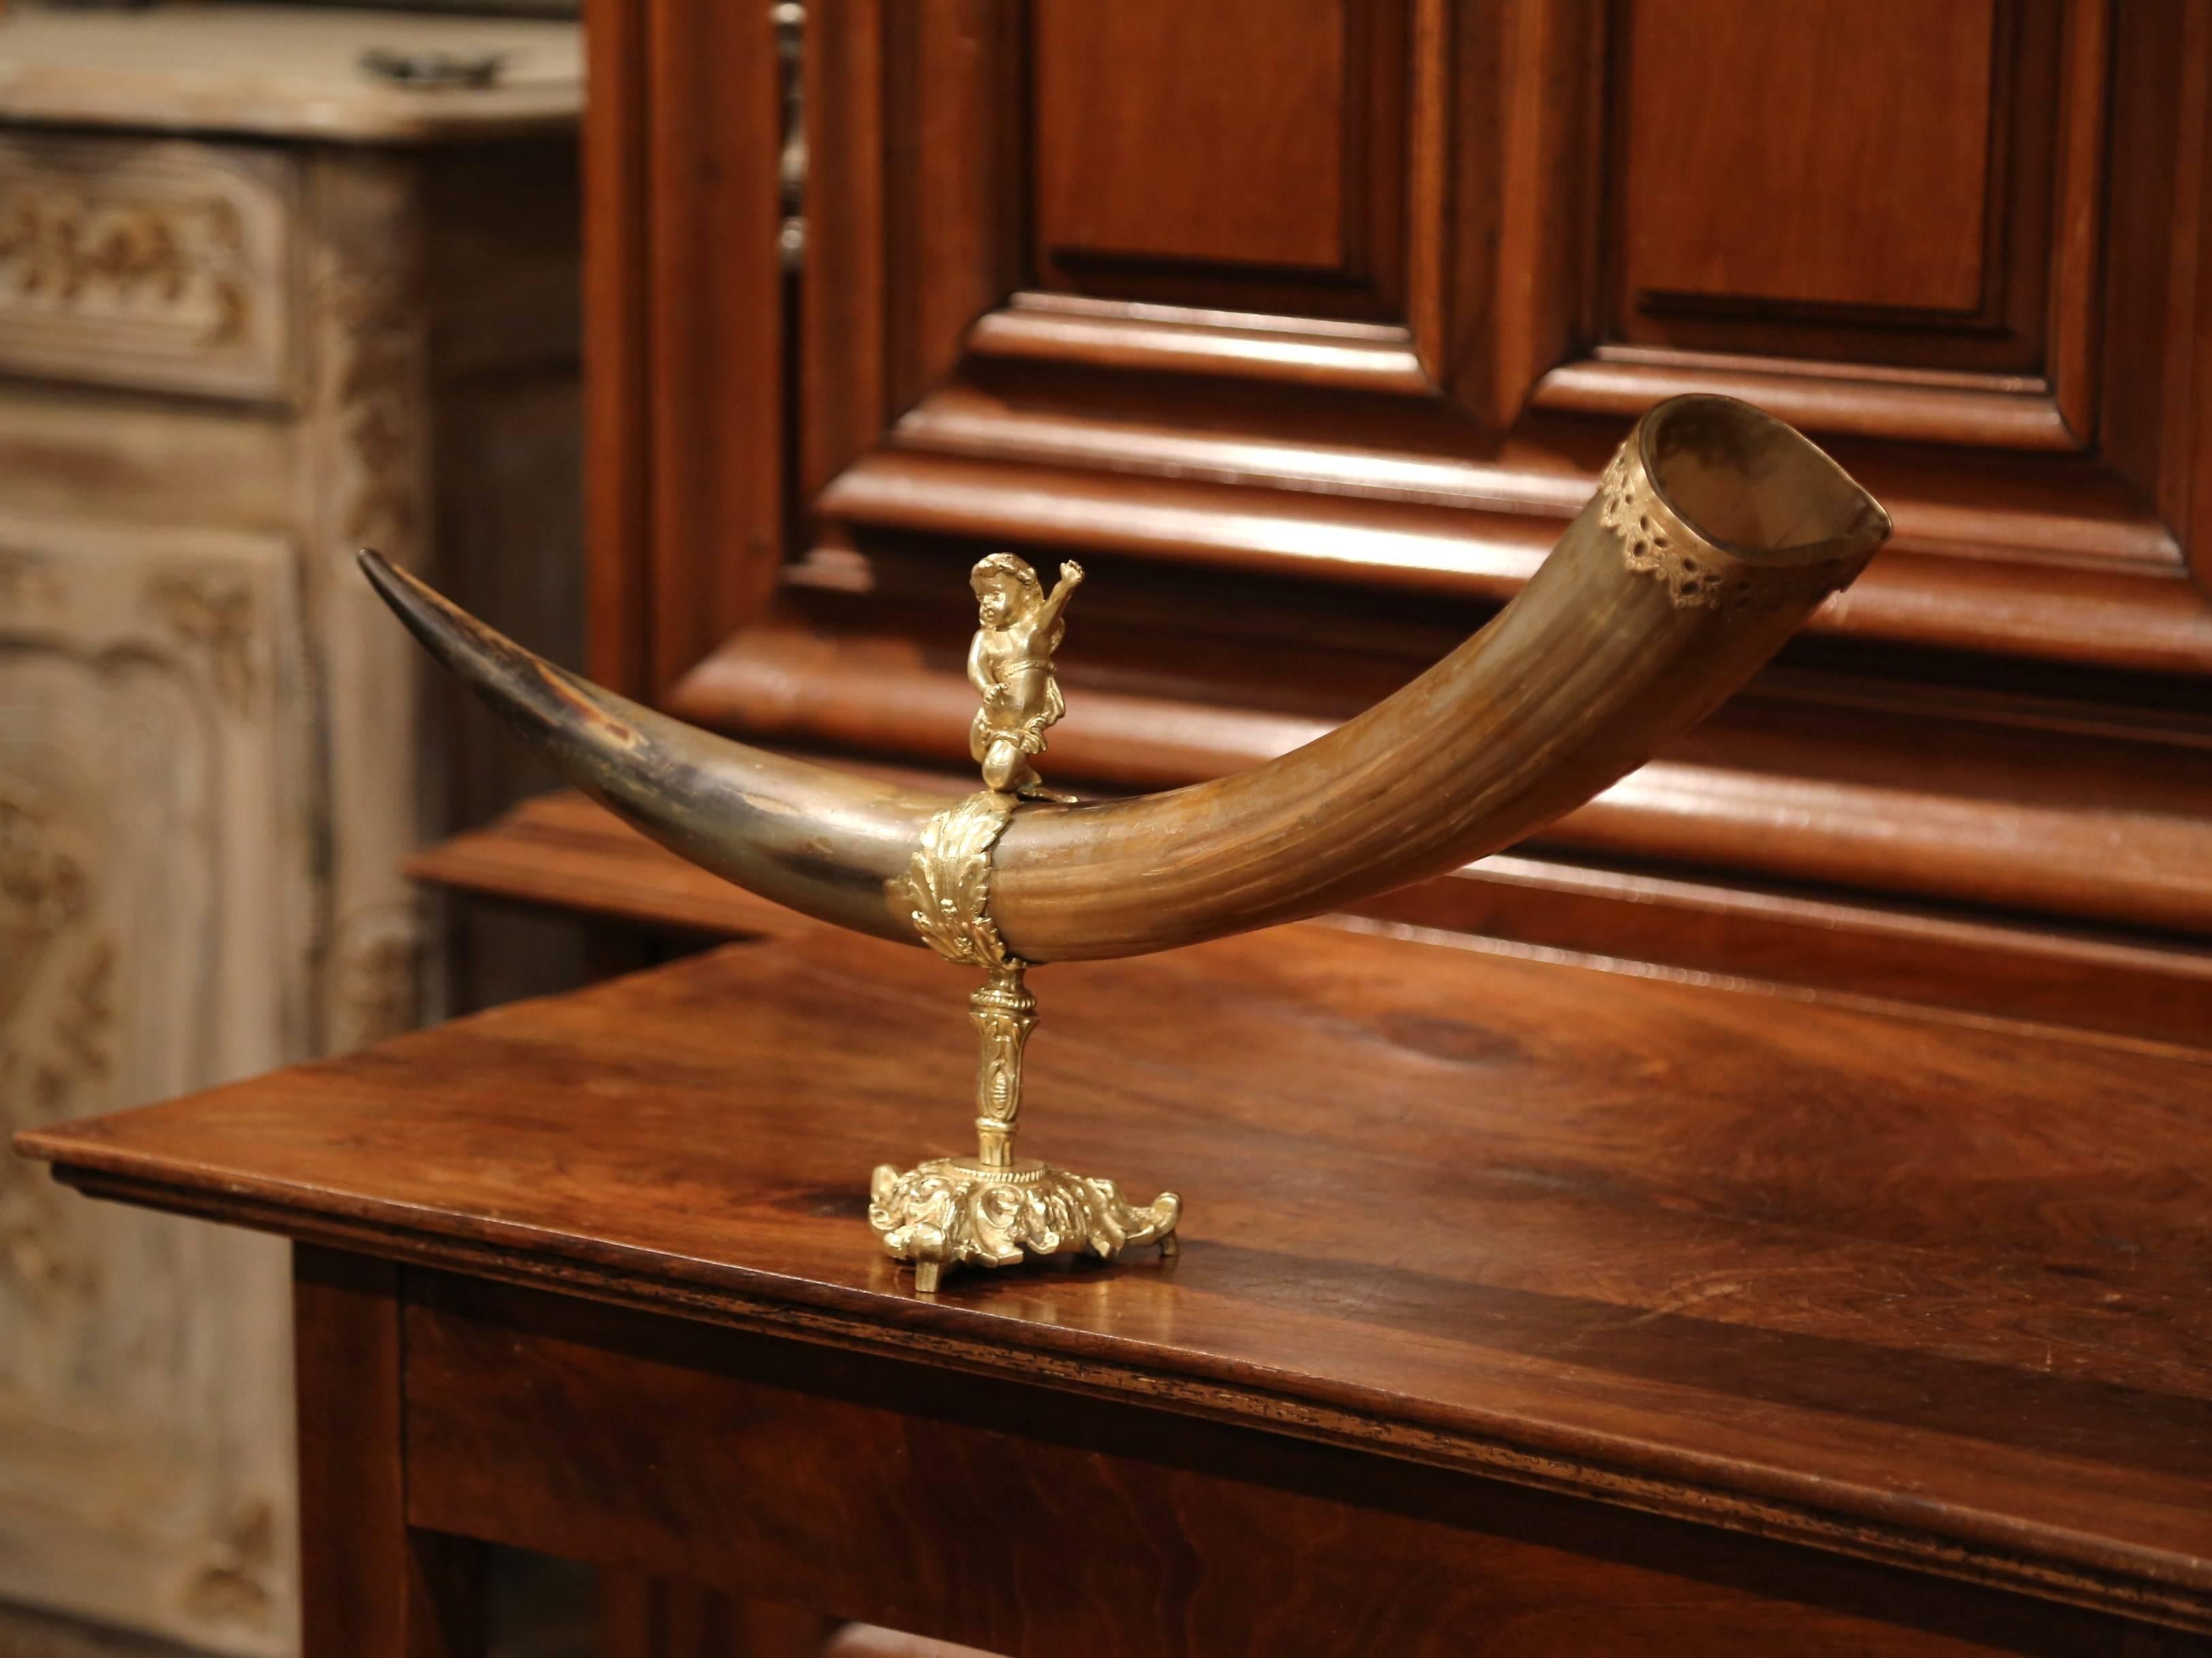 Display this antique drinking Horn in your office or on a shelf. Crafted in France, circa 1860, the Horn of plenty cornucopia is mounted on an intricate bronze base, which is wrapped around the Horn with decorative bronze acanthus leaves. The Horn